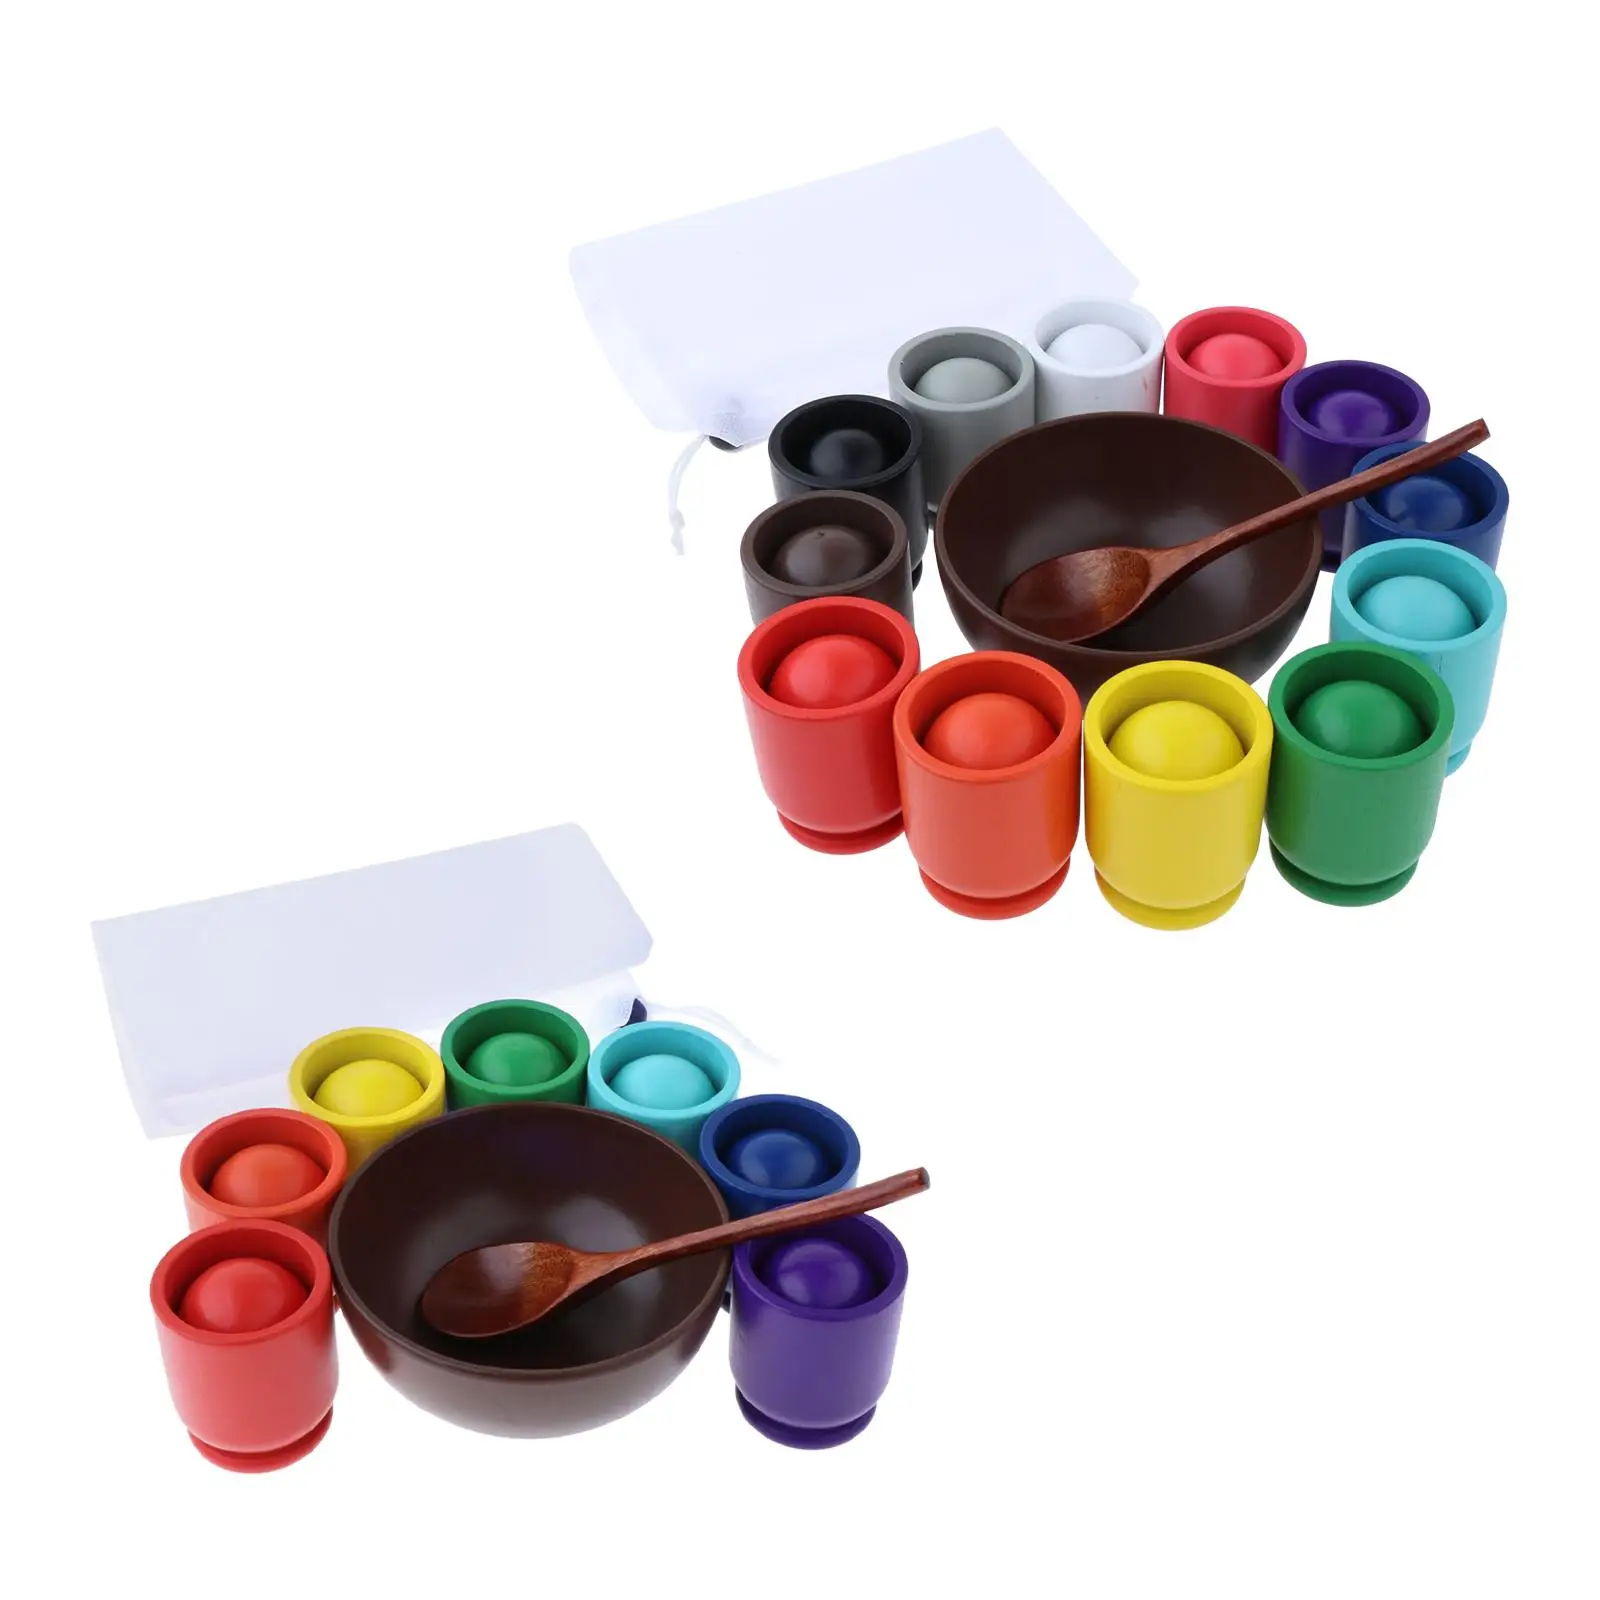 Balls in Cups Montessori Toy Preschool Learning Toy Matching and Counting Baby Educational Toys for Boys Girls Children Kids